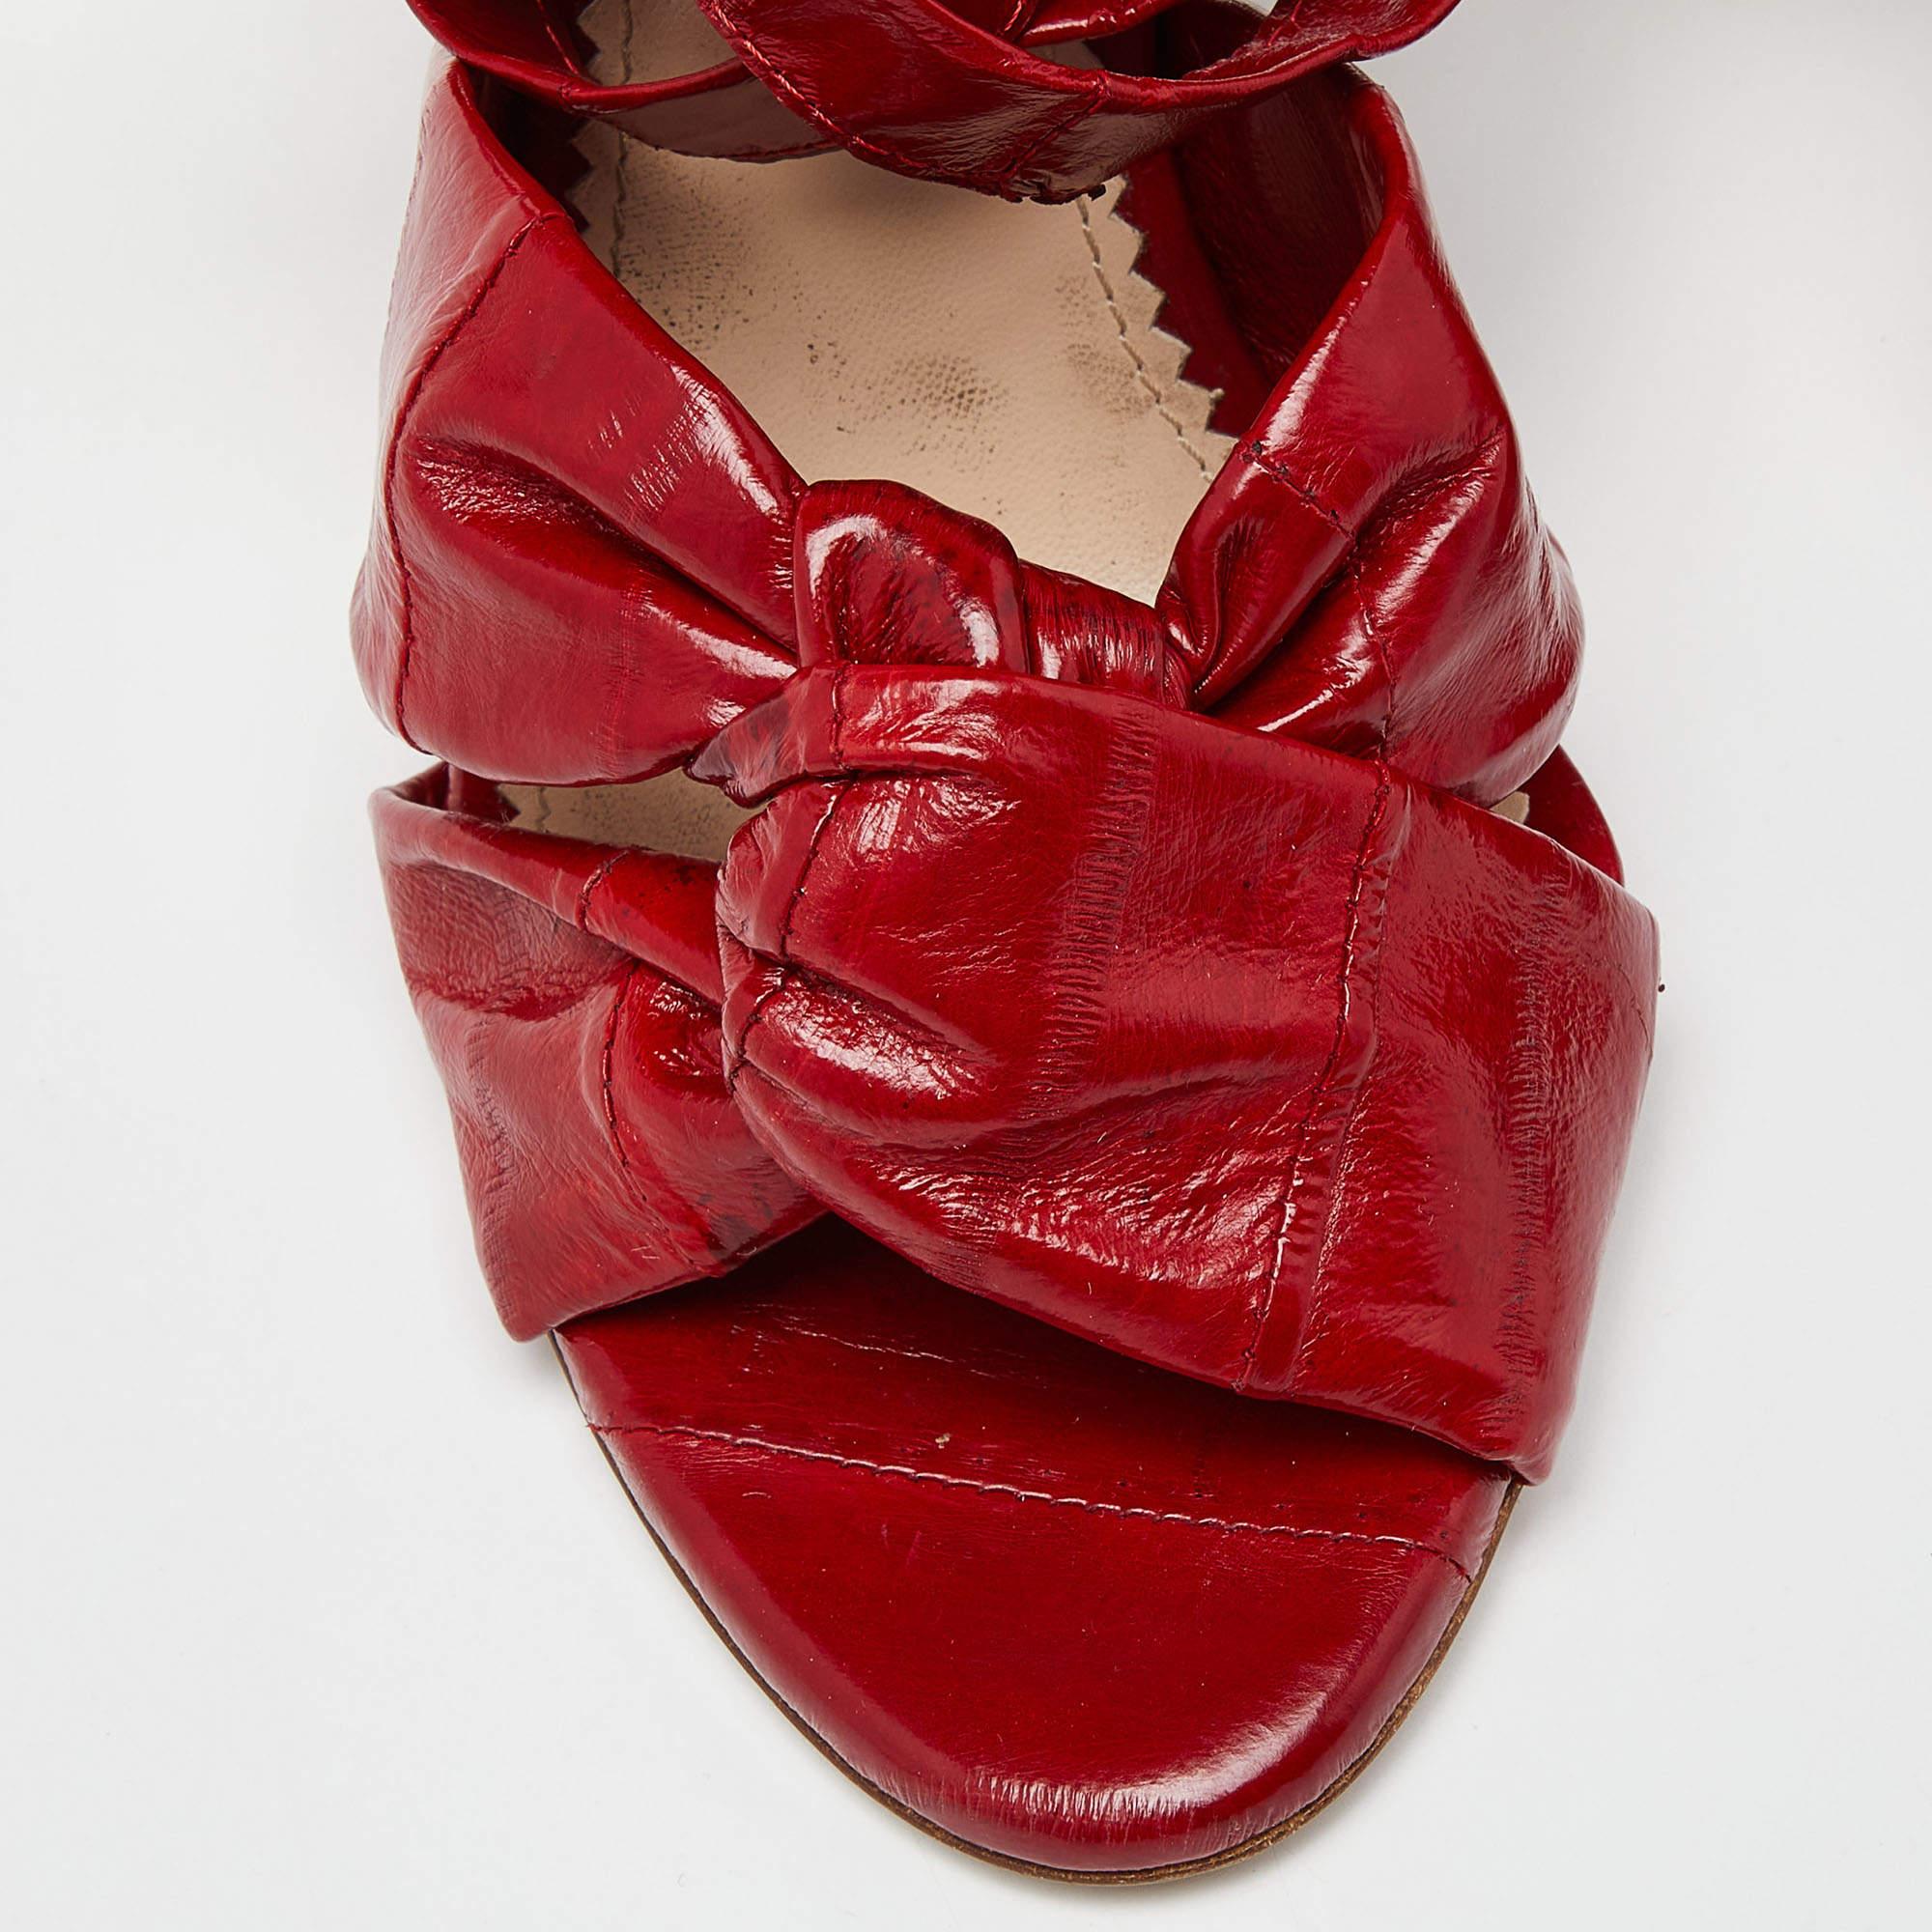 Altuzarra Red Eel Leather 'Zuni' Knotted Sandals Size 35 For Sale 1